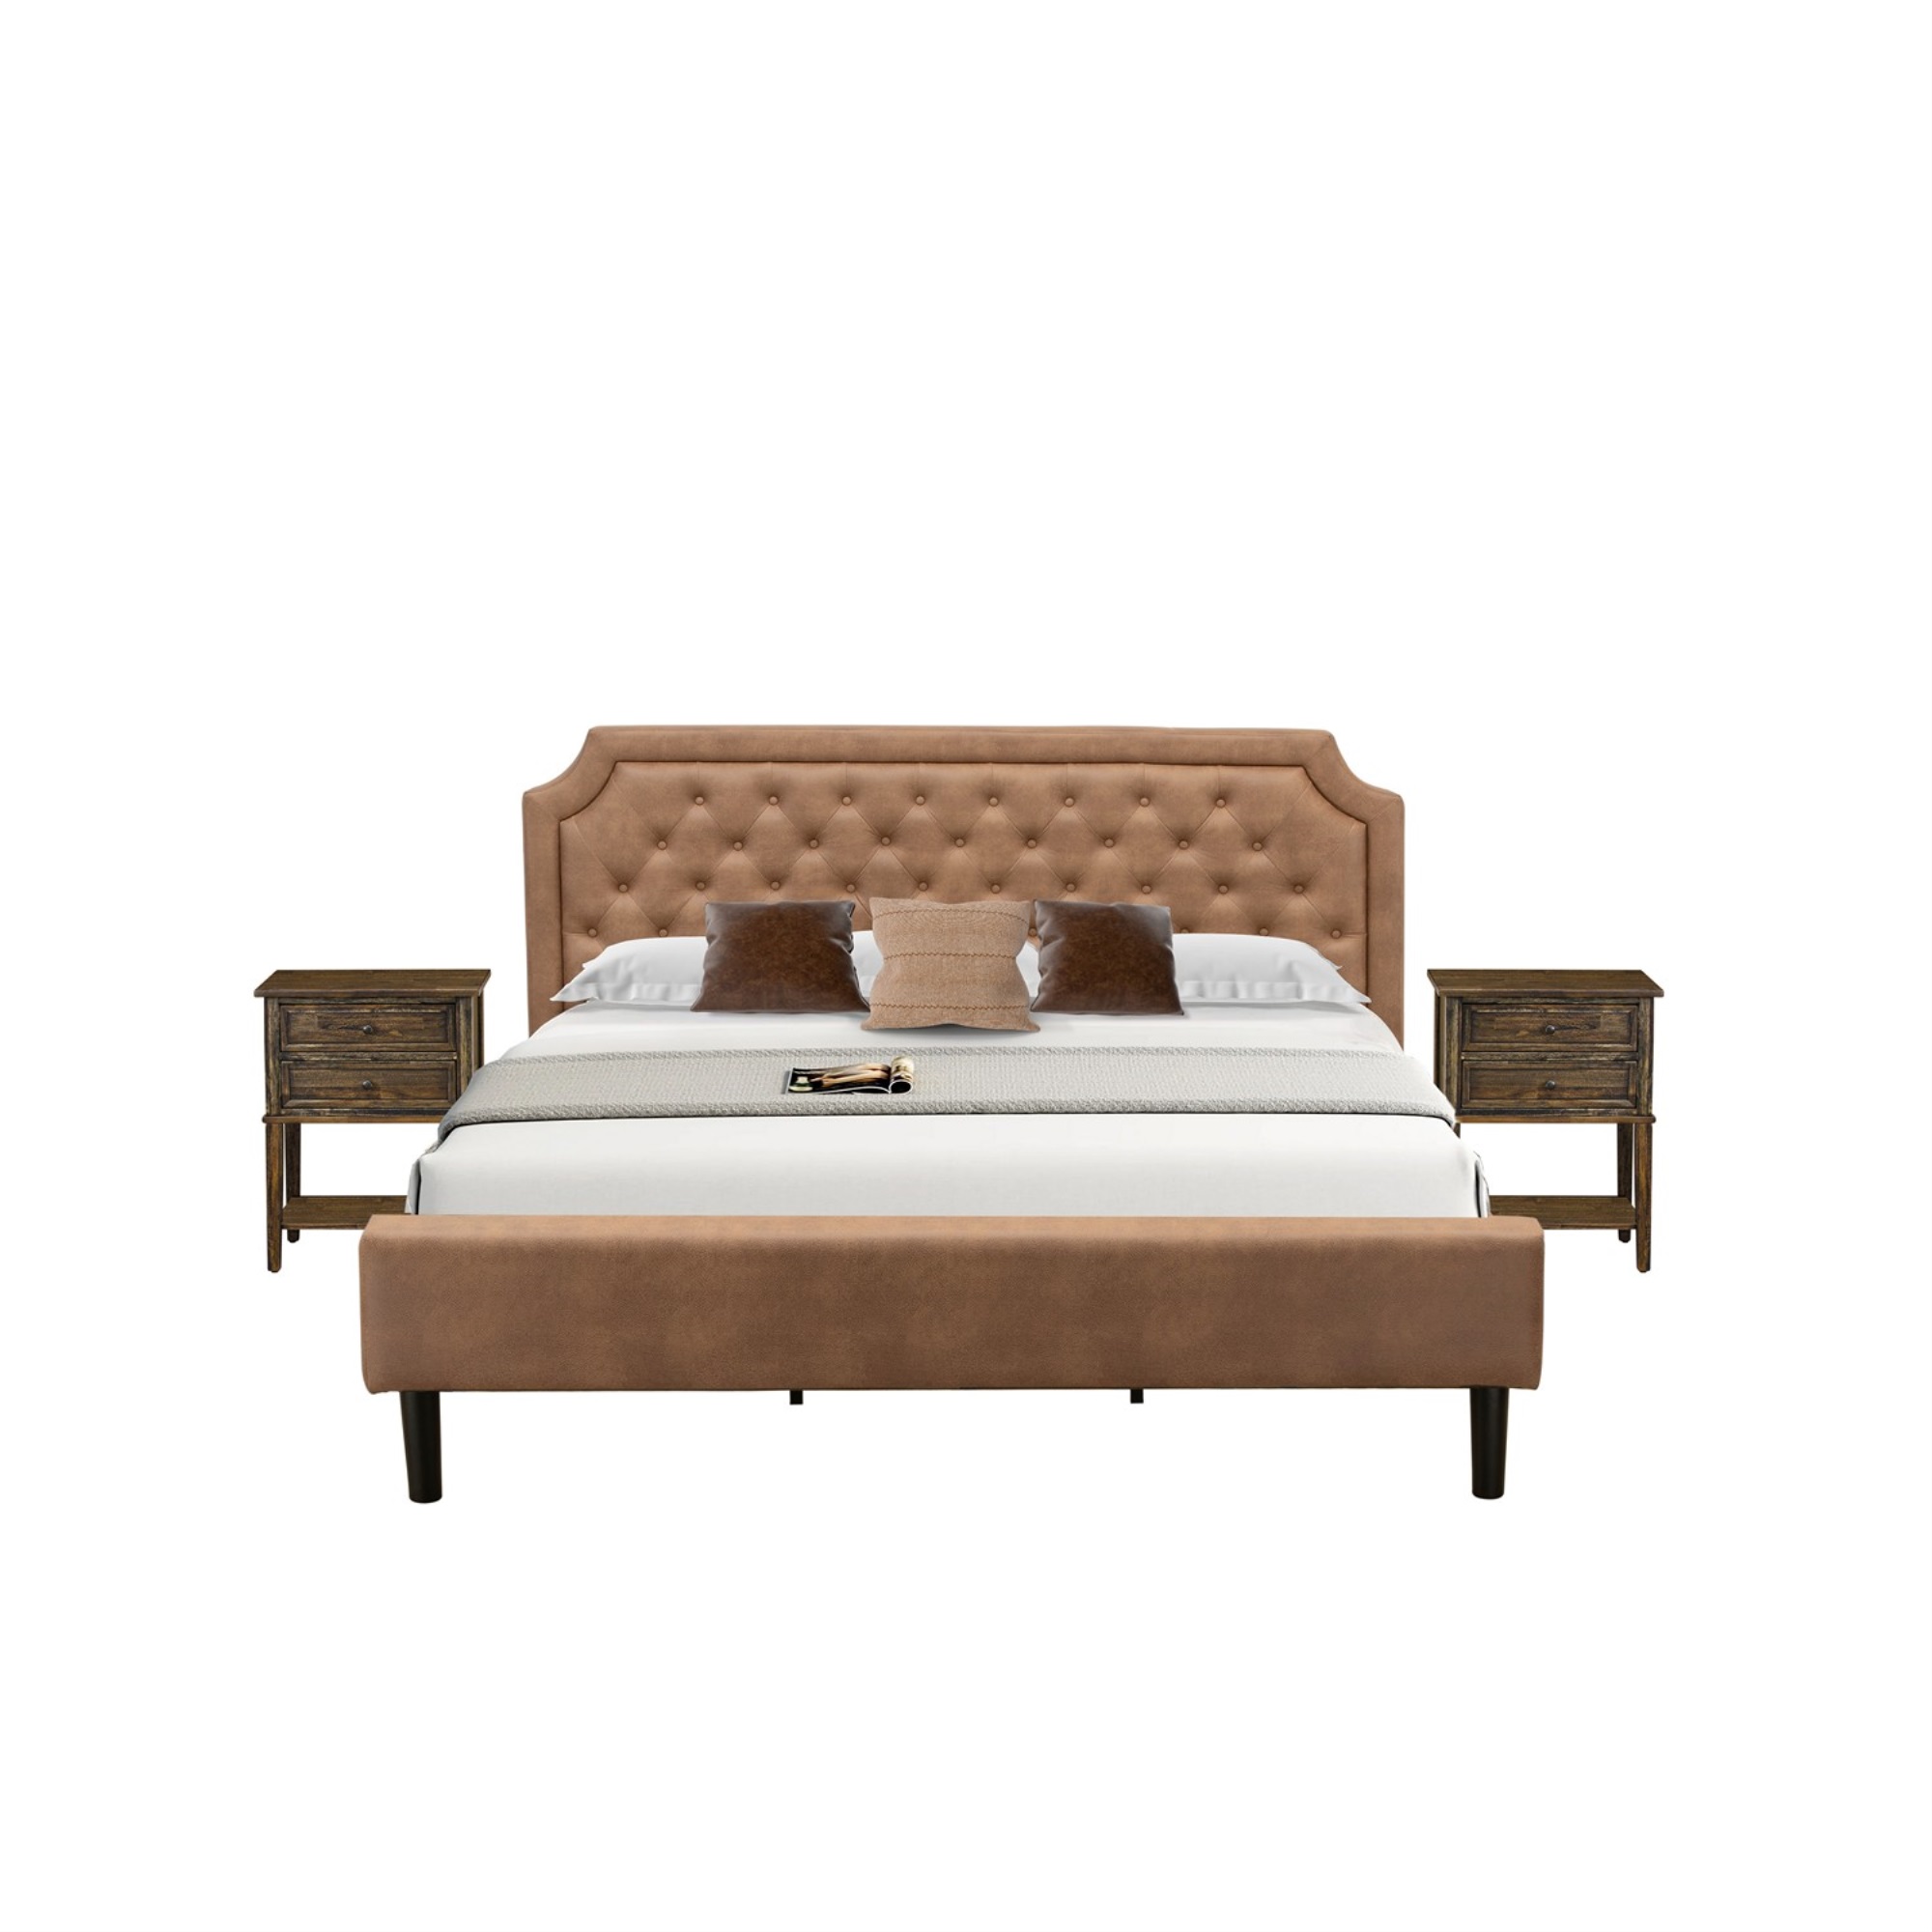 East West Furniture GB28K-2VL07 3-Piece Granbury Bed Set with a King Bedframe and 2 Distressed Jacobean Night Stand - Brown Faux Leather with Brow